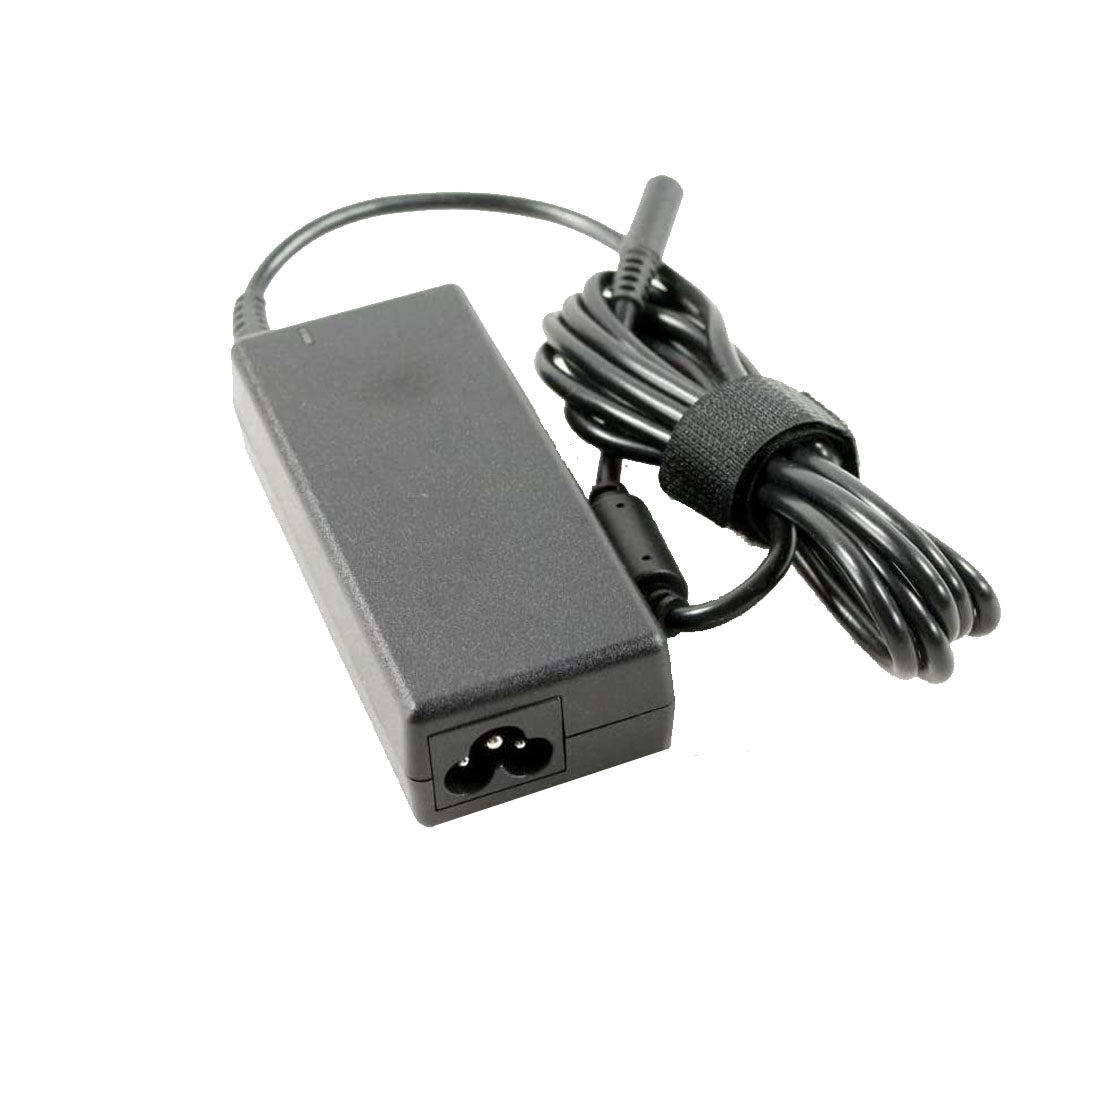 Dell Original 65W 19.5V 4.5mm Pin Laptop Charger Adapter for Inspiron Desktop 3252 With Power Cord